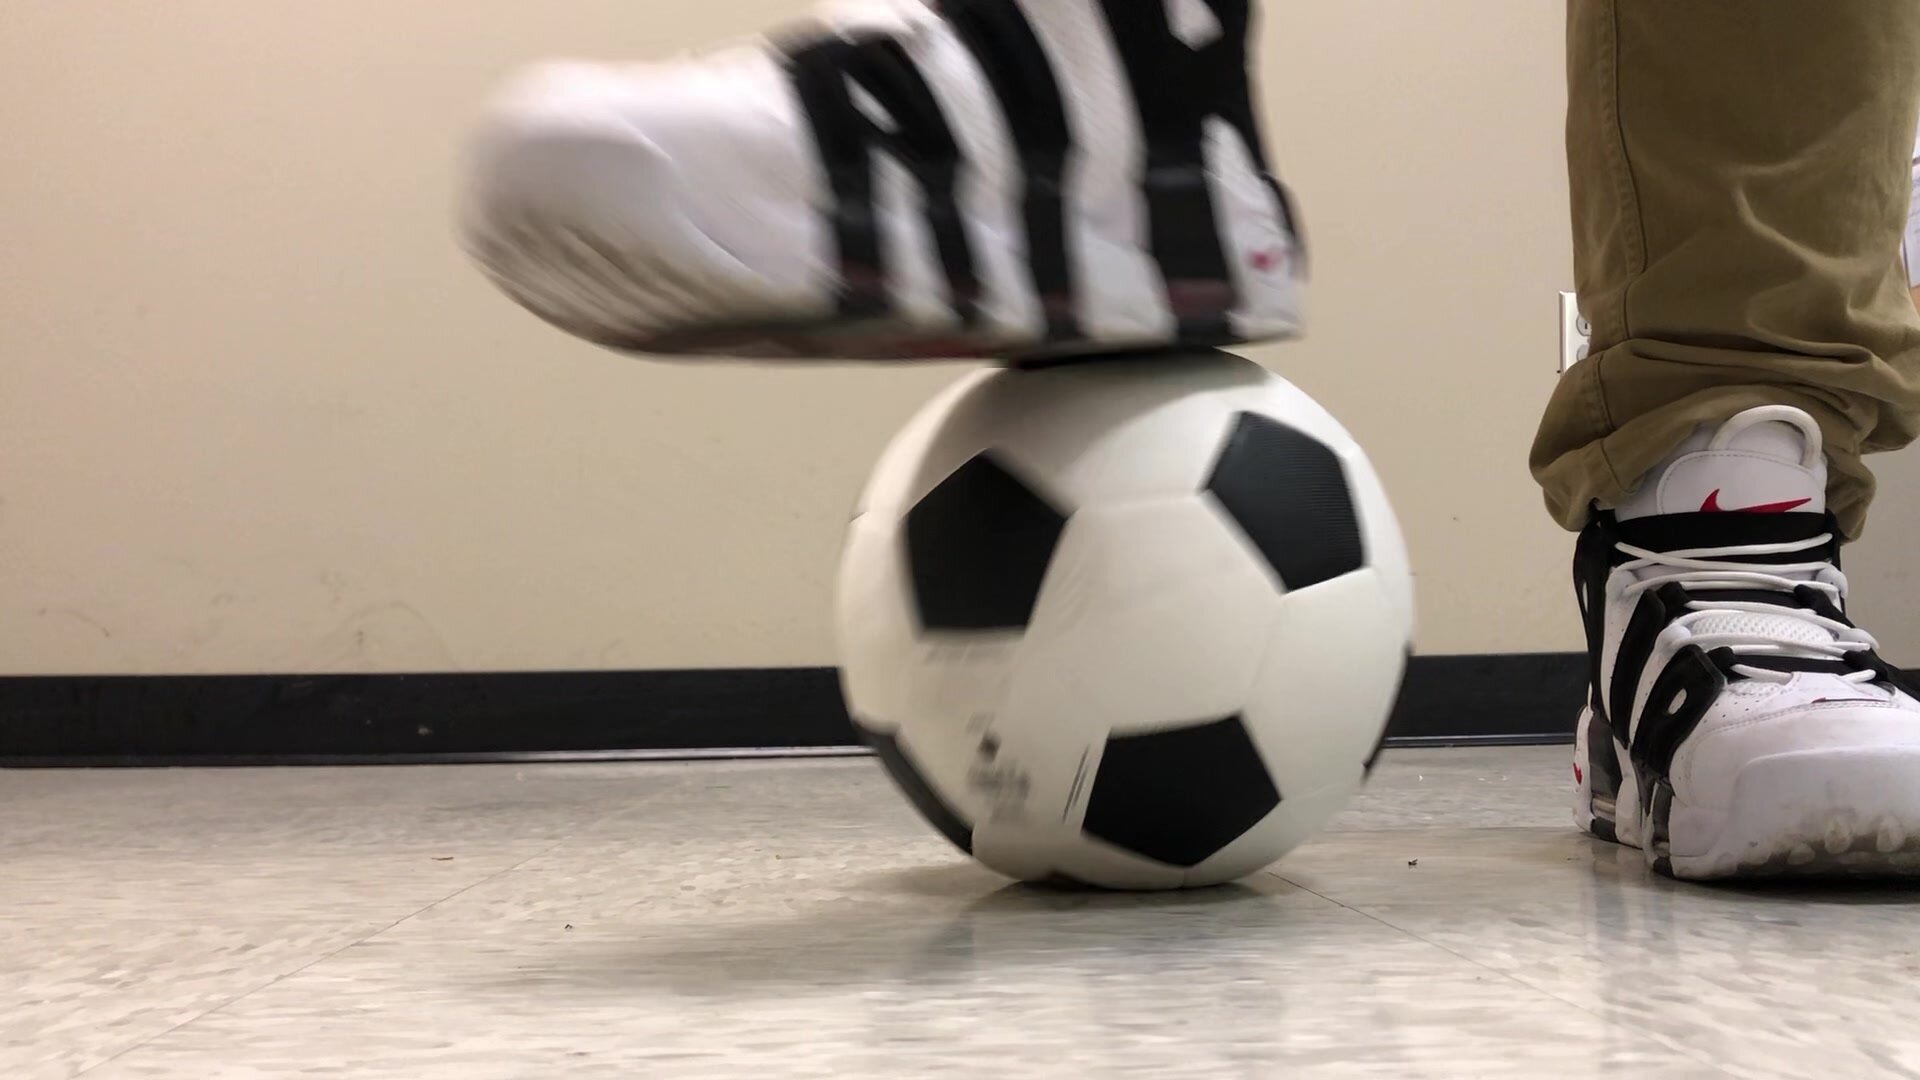 Soccer Ball and Uptempo Sneaker play